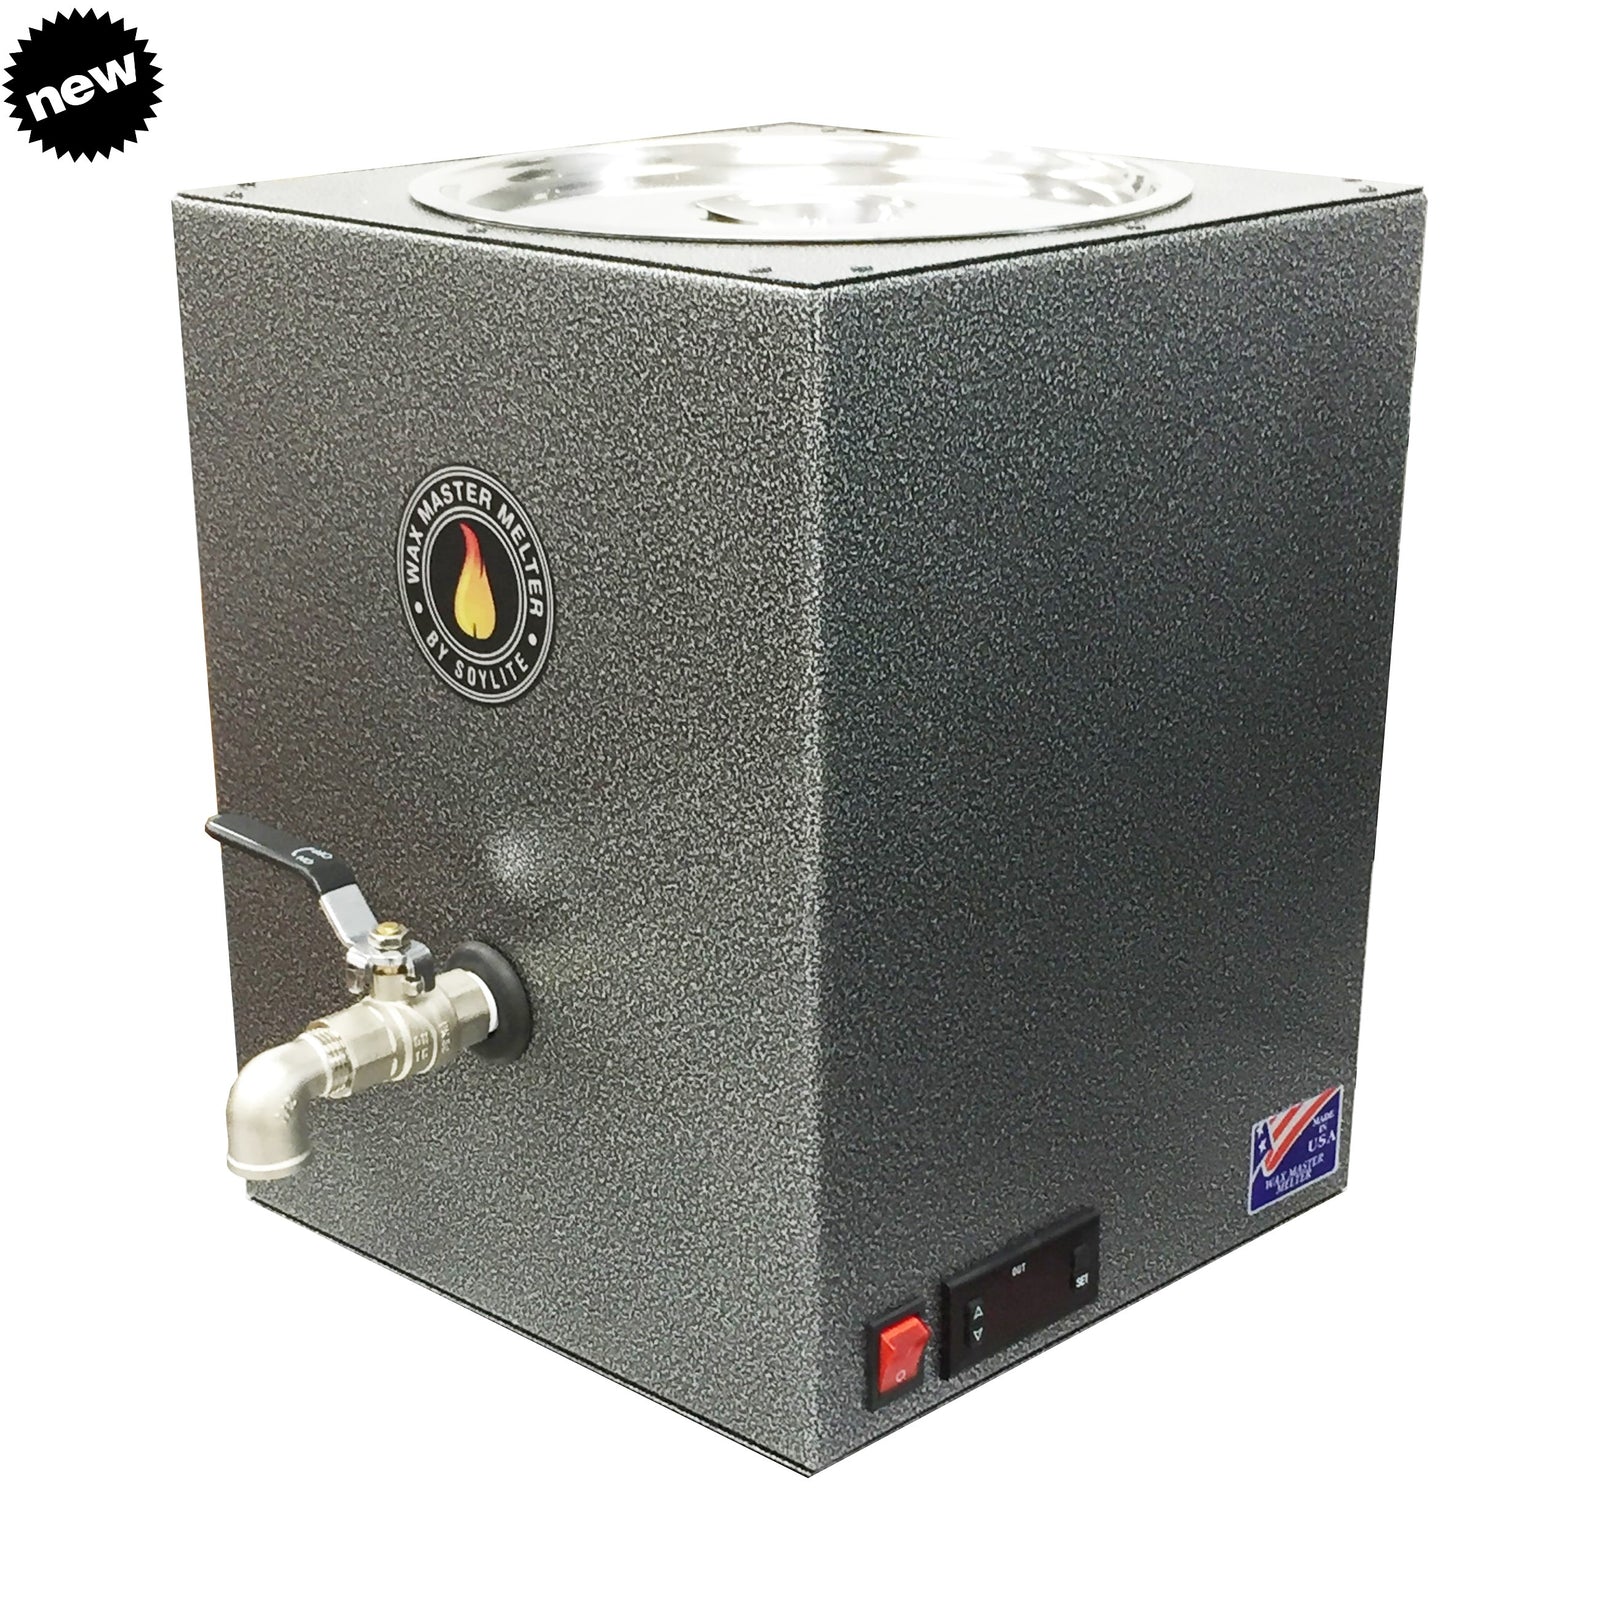 Wax Master Melter from Soylite Wax Melter